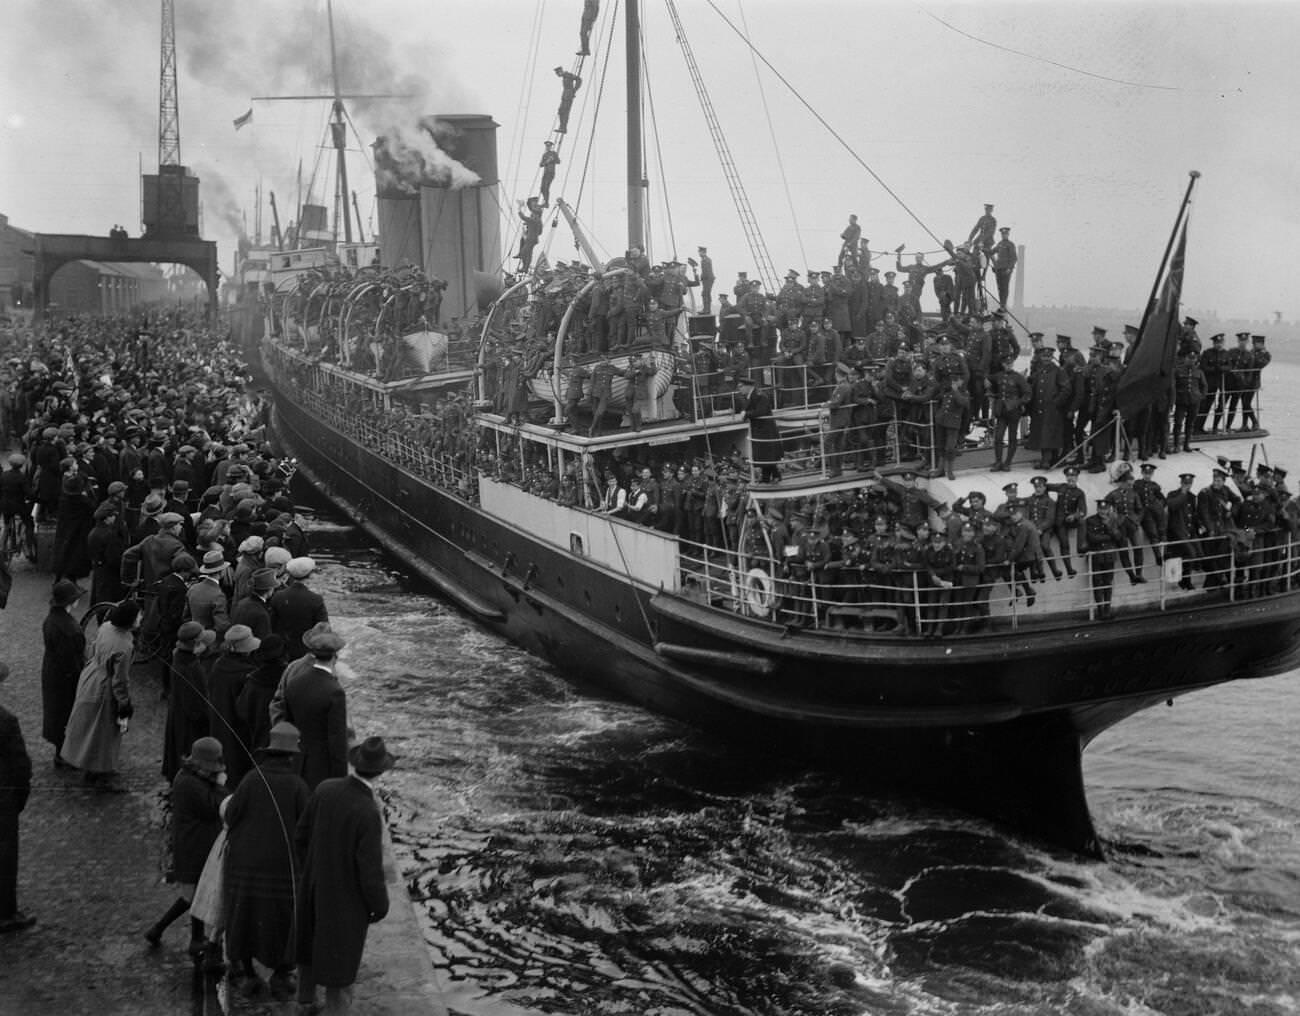 Dublin's farewell to British troops as the troopship moved away, 1922.